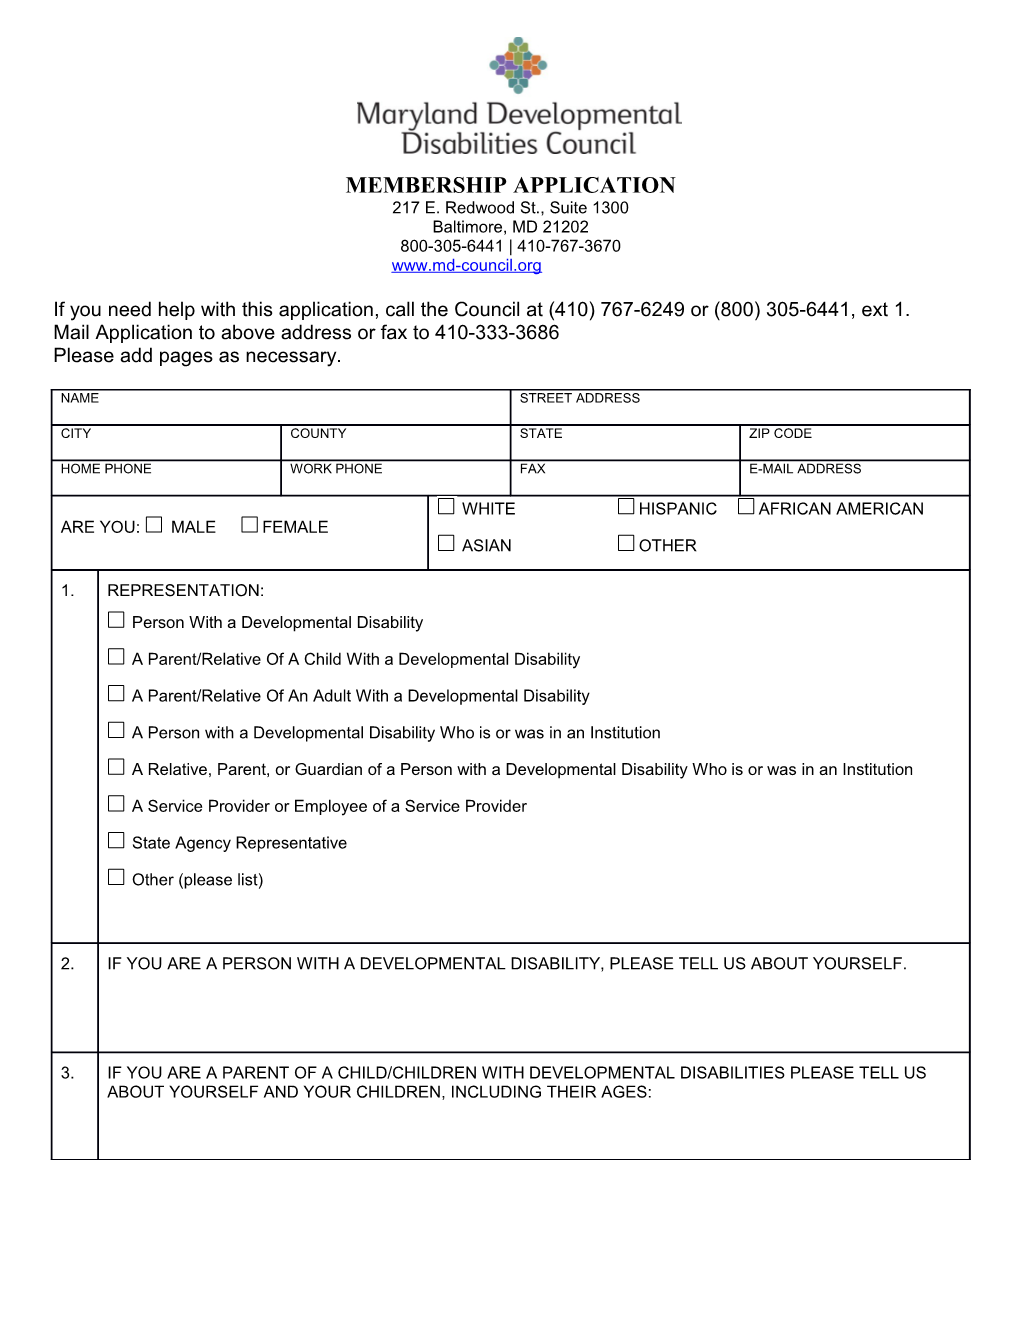 If You Need Help with This Application, Call the Council at (410) 767-6249 Or (800) 305-6441